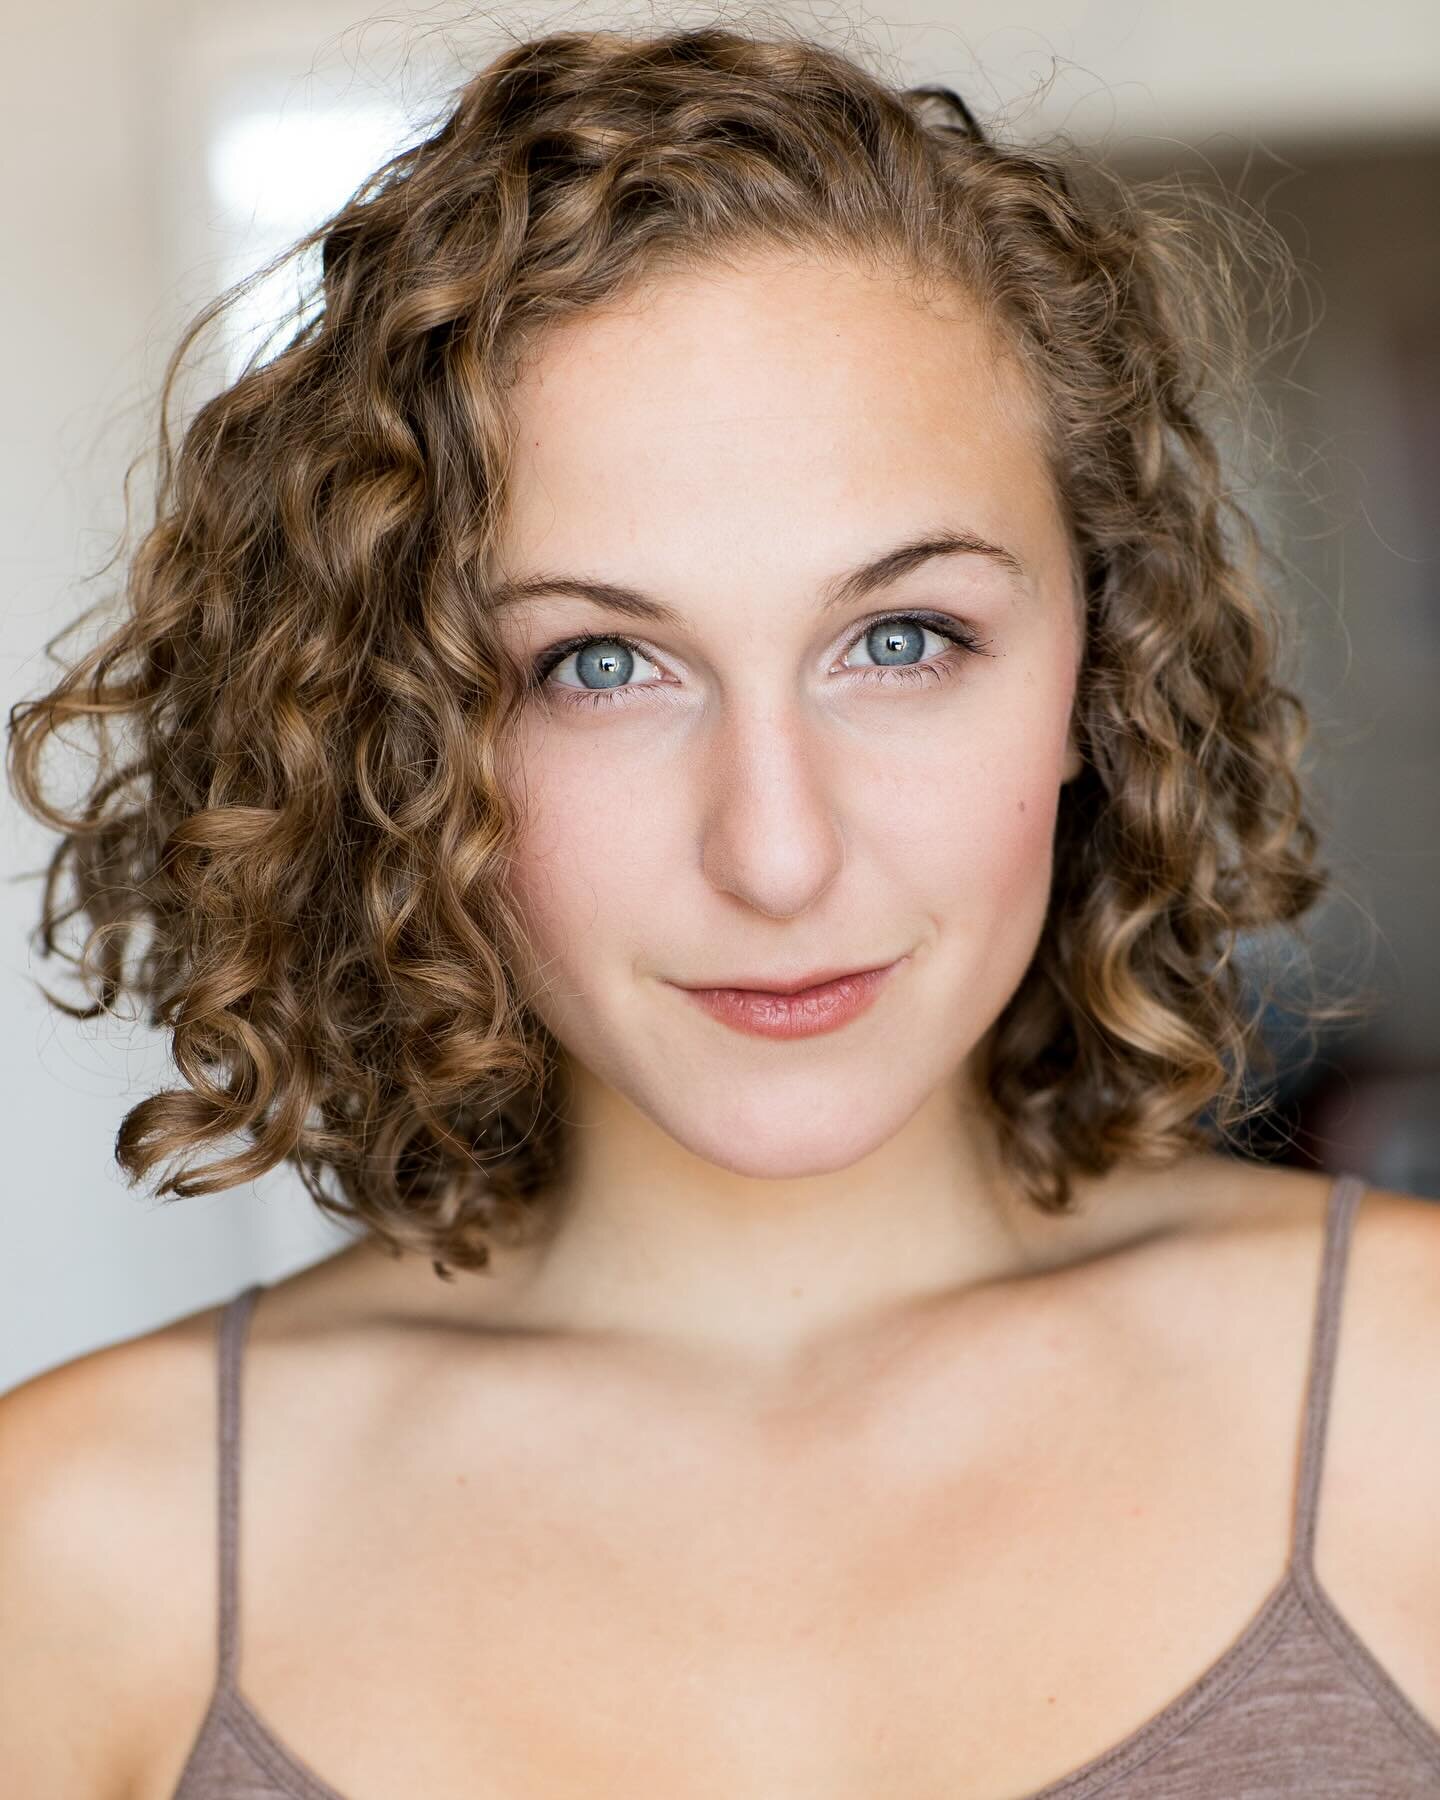 Client Spotlight: HOPE ENDRENYI
@hope_endrenyi 

So excited to work with Hope. She&rsquo;s a talented dancer, singer and actor. She took some time away from the stage to do climate change work (which is awesome) and she&rsquo;s back! 🤩

#mmvtalent